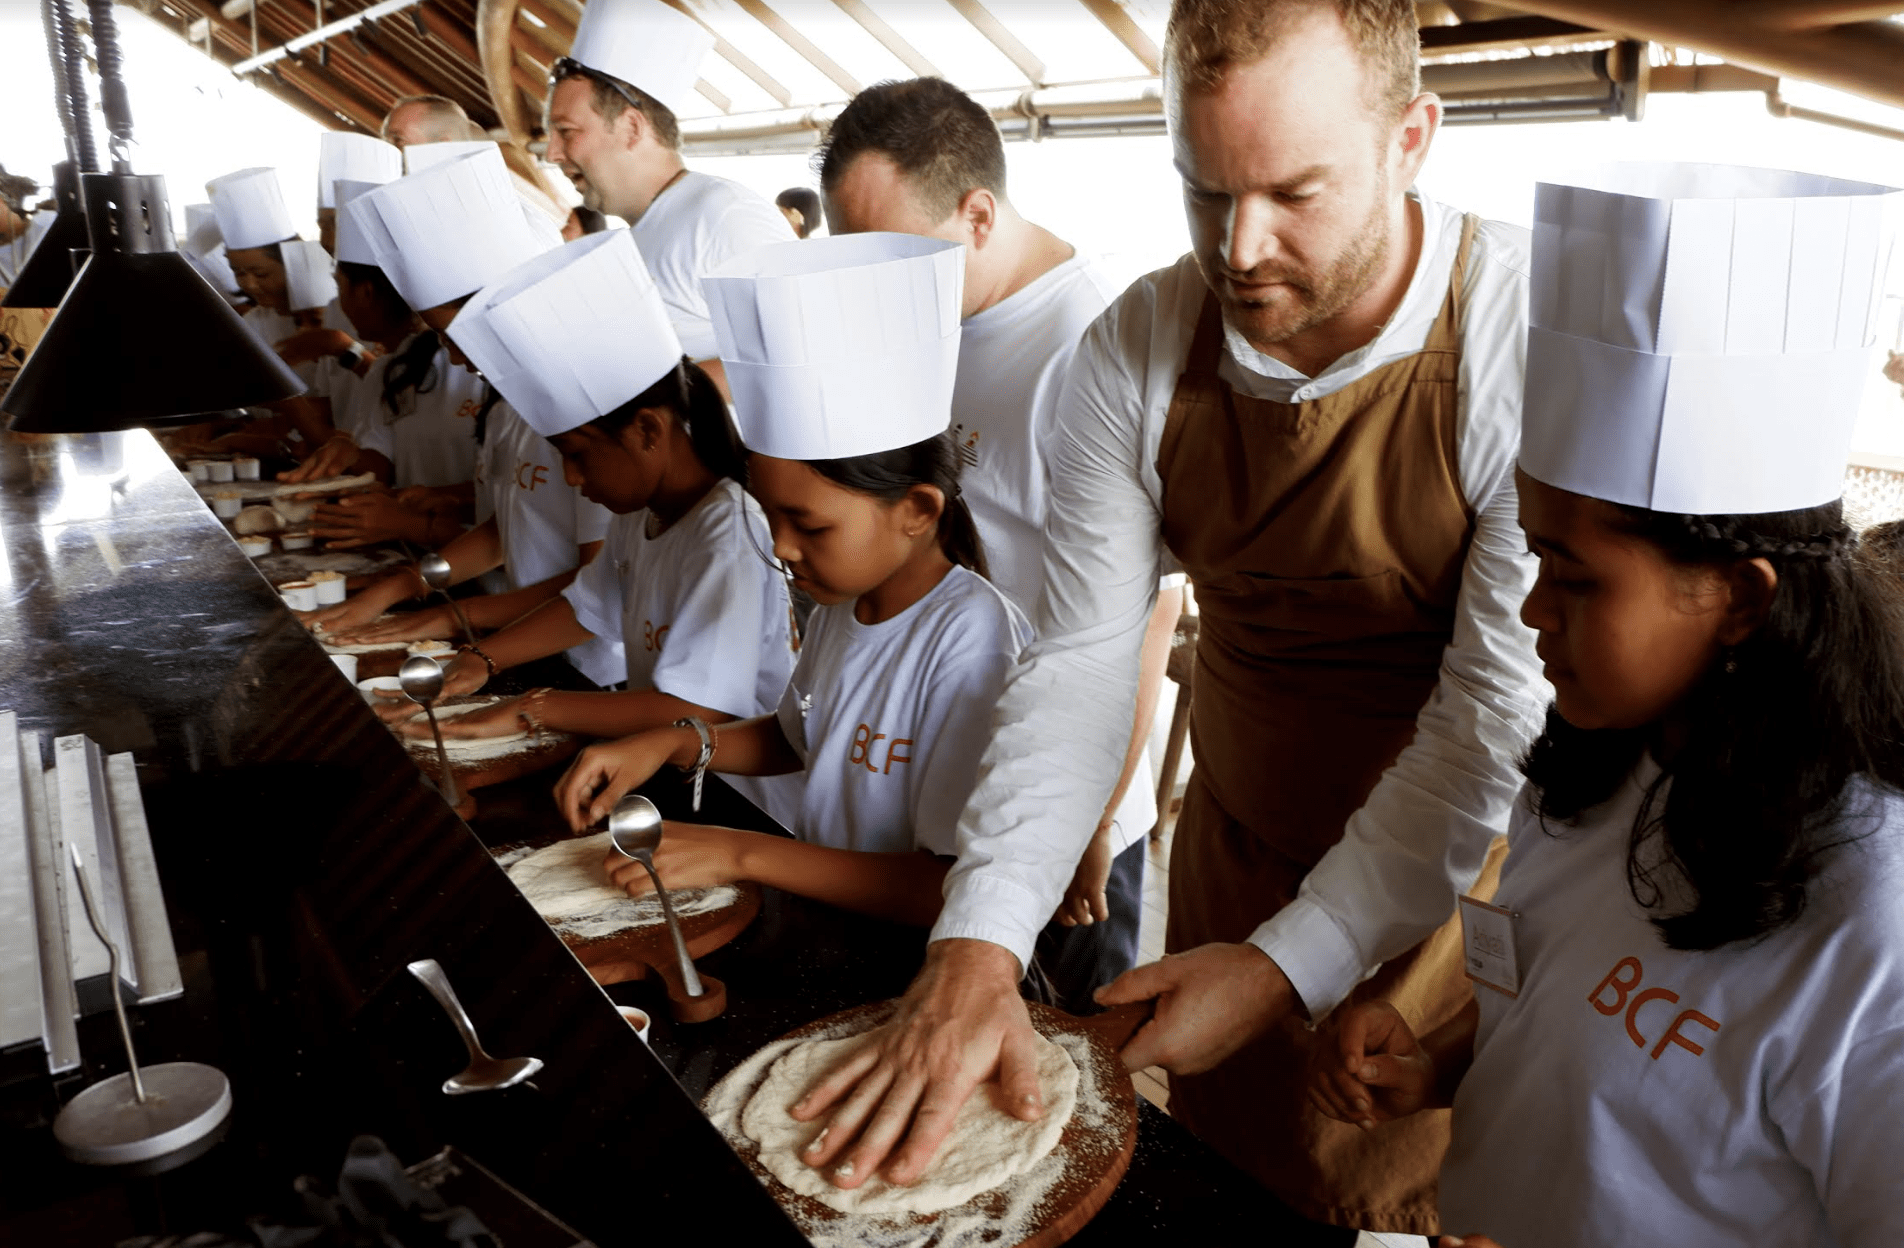 Charity Dinner Hosted by Mamaka by Ovolo and Bali Children Foundation Features Top Chefs, DJ, and Fires